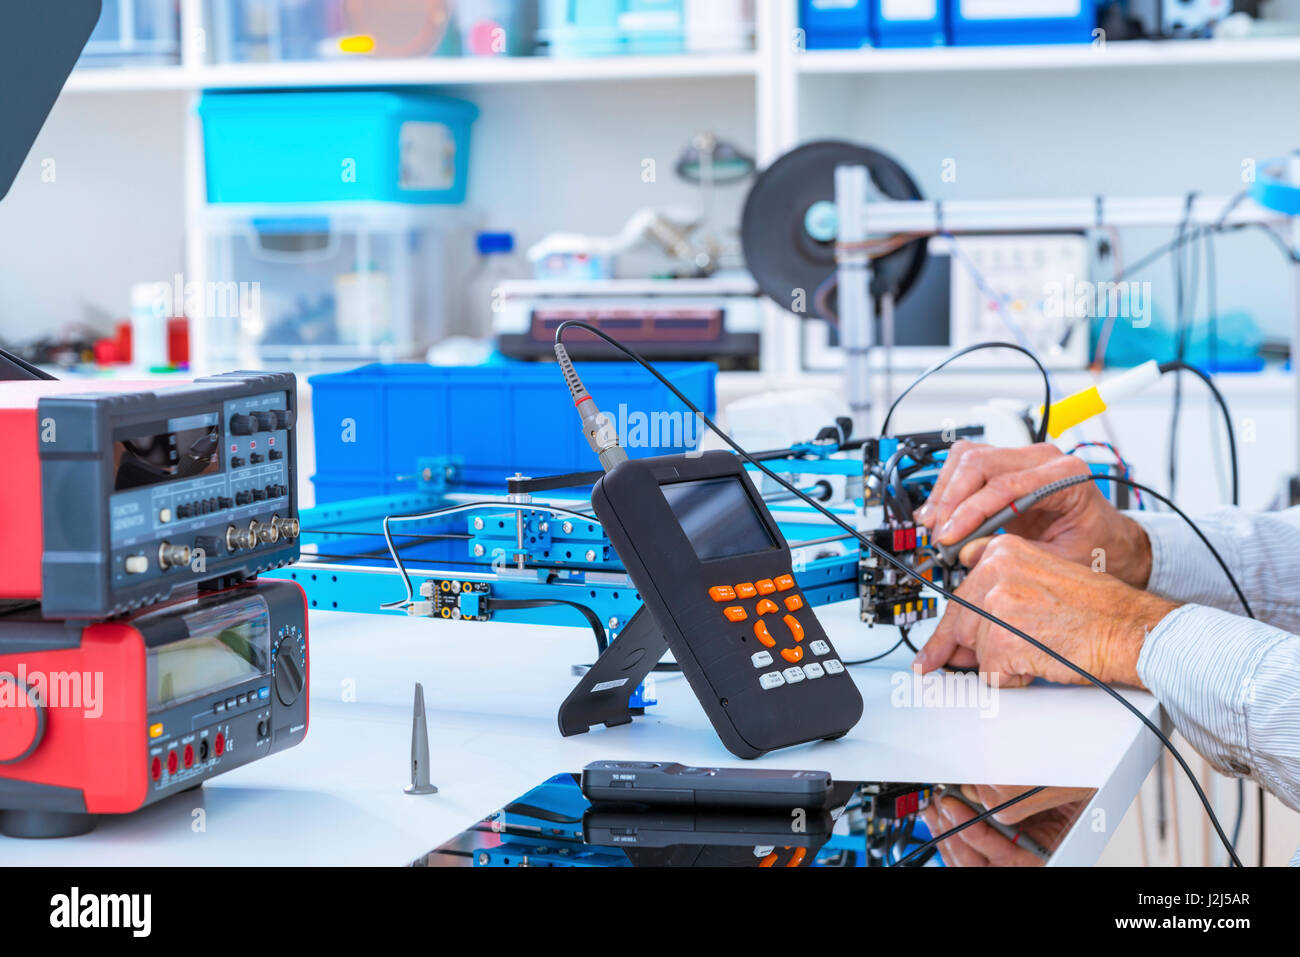 Person working in electronics laboratory. Stock Photo